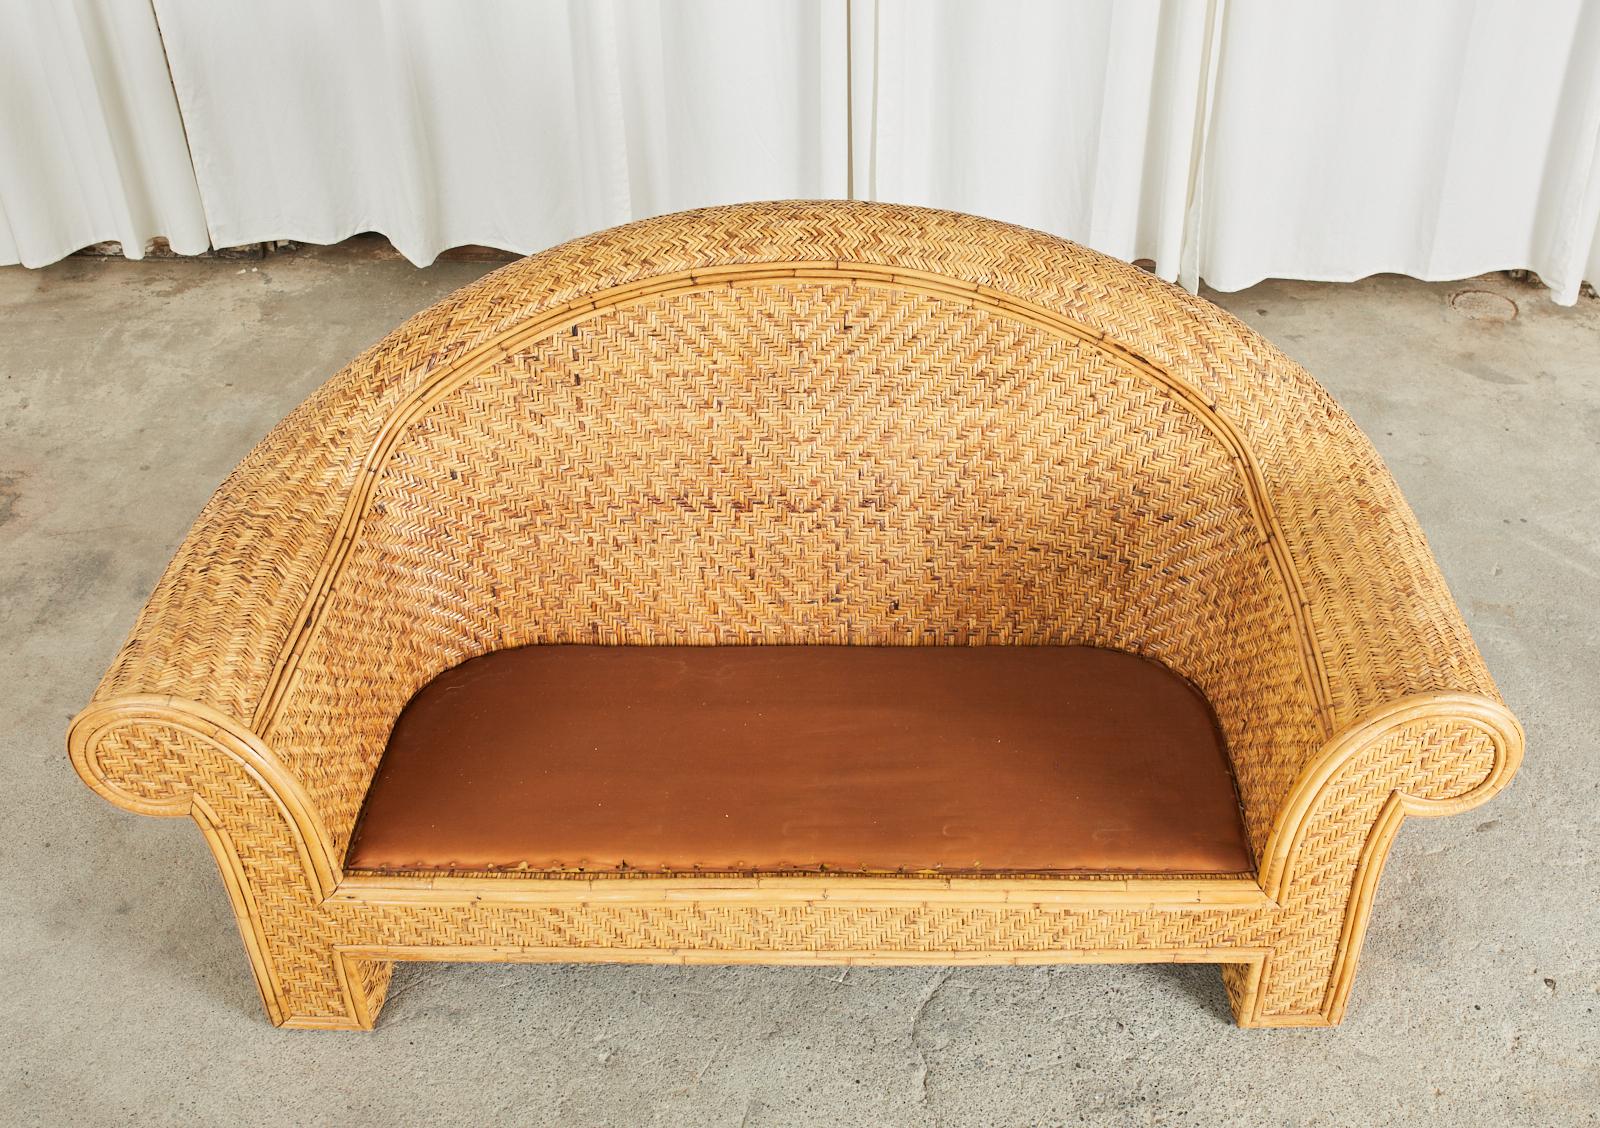 Ralph Lauren Attributed Woven Rattan Bamboo Sofa Settee In Good Condition For Sale In Rio Vista, CA